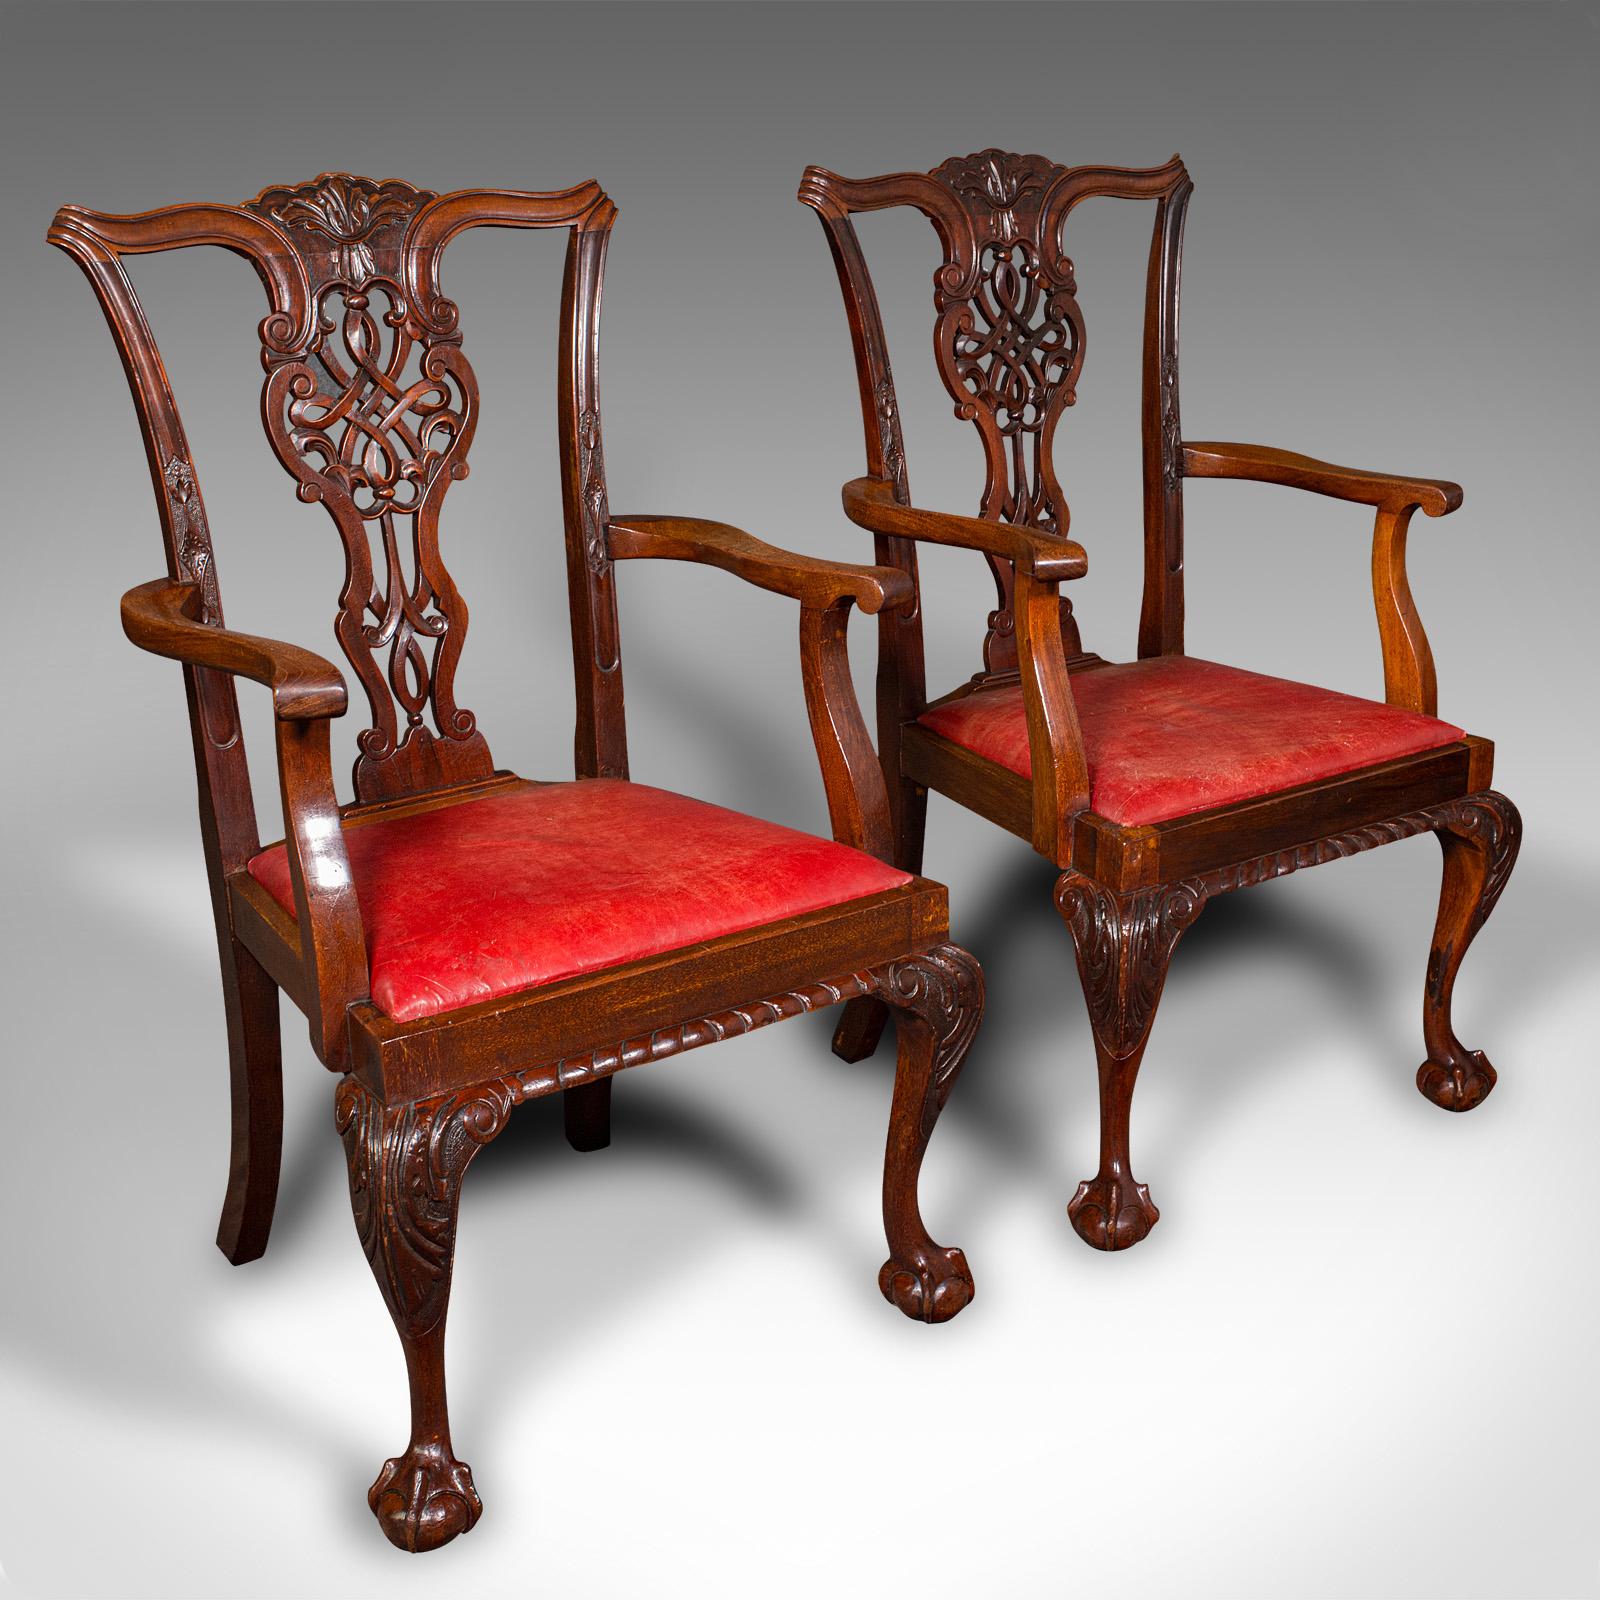 This is a set of 8 antique dining chairs. An English, mahogany and leather seat with Chippendale revival taste, dating to the late Victorian period, circa 1900.

Generously sized, ornate suite of 8 dining chairs for the grandest of dining